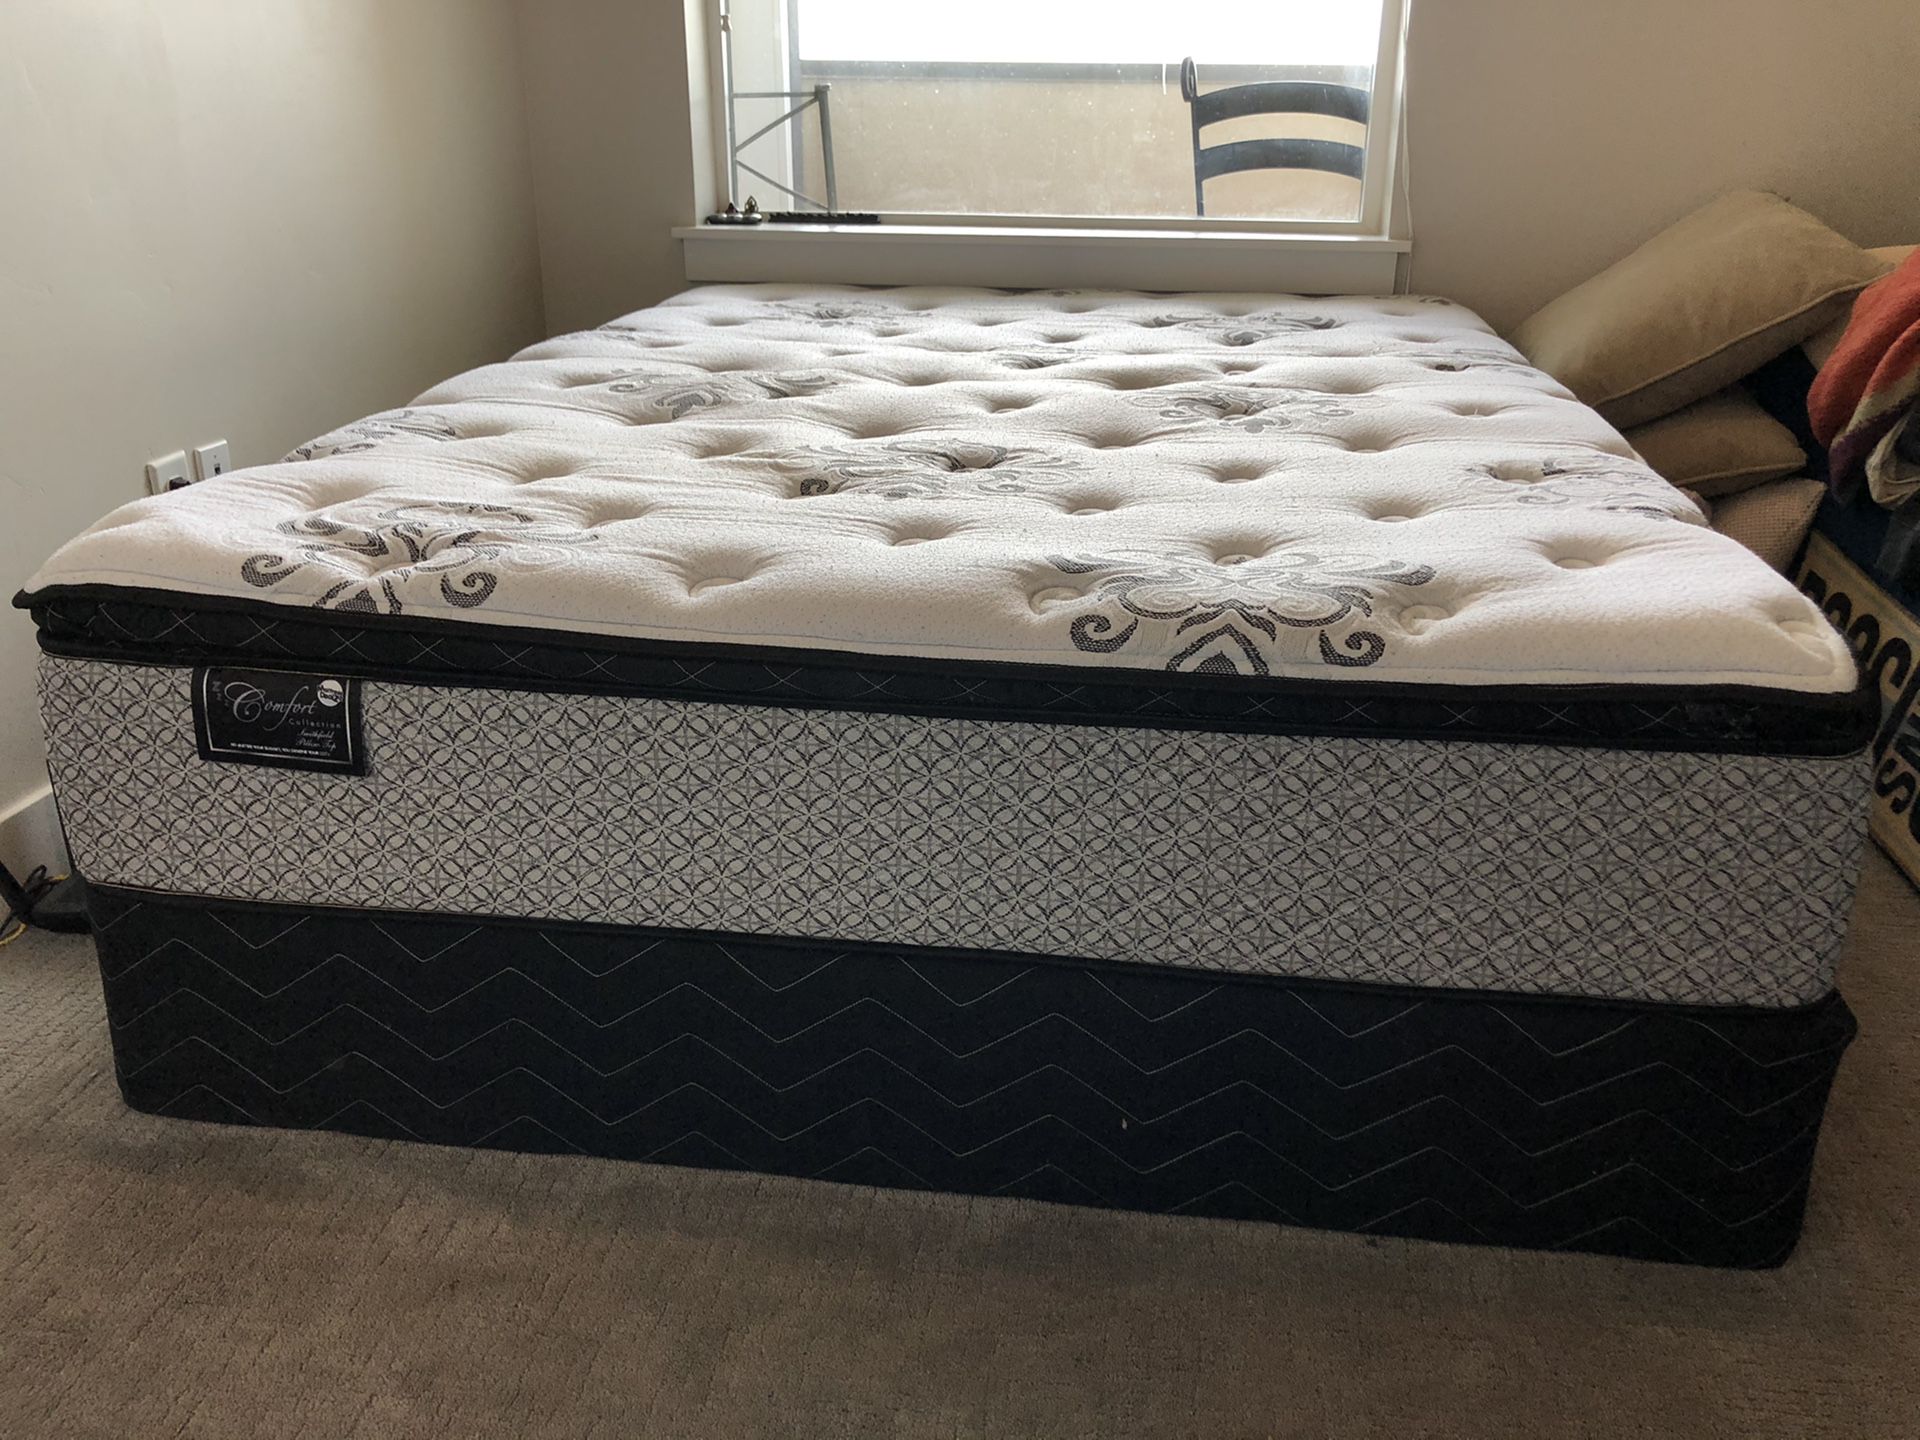 Bed mattress box spring two copper infused Serta pillows and one Tempur-pedic pillow that retails for $170